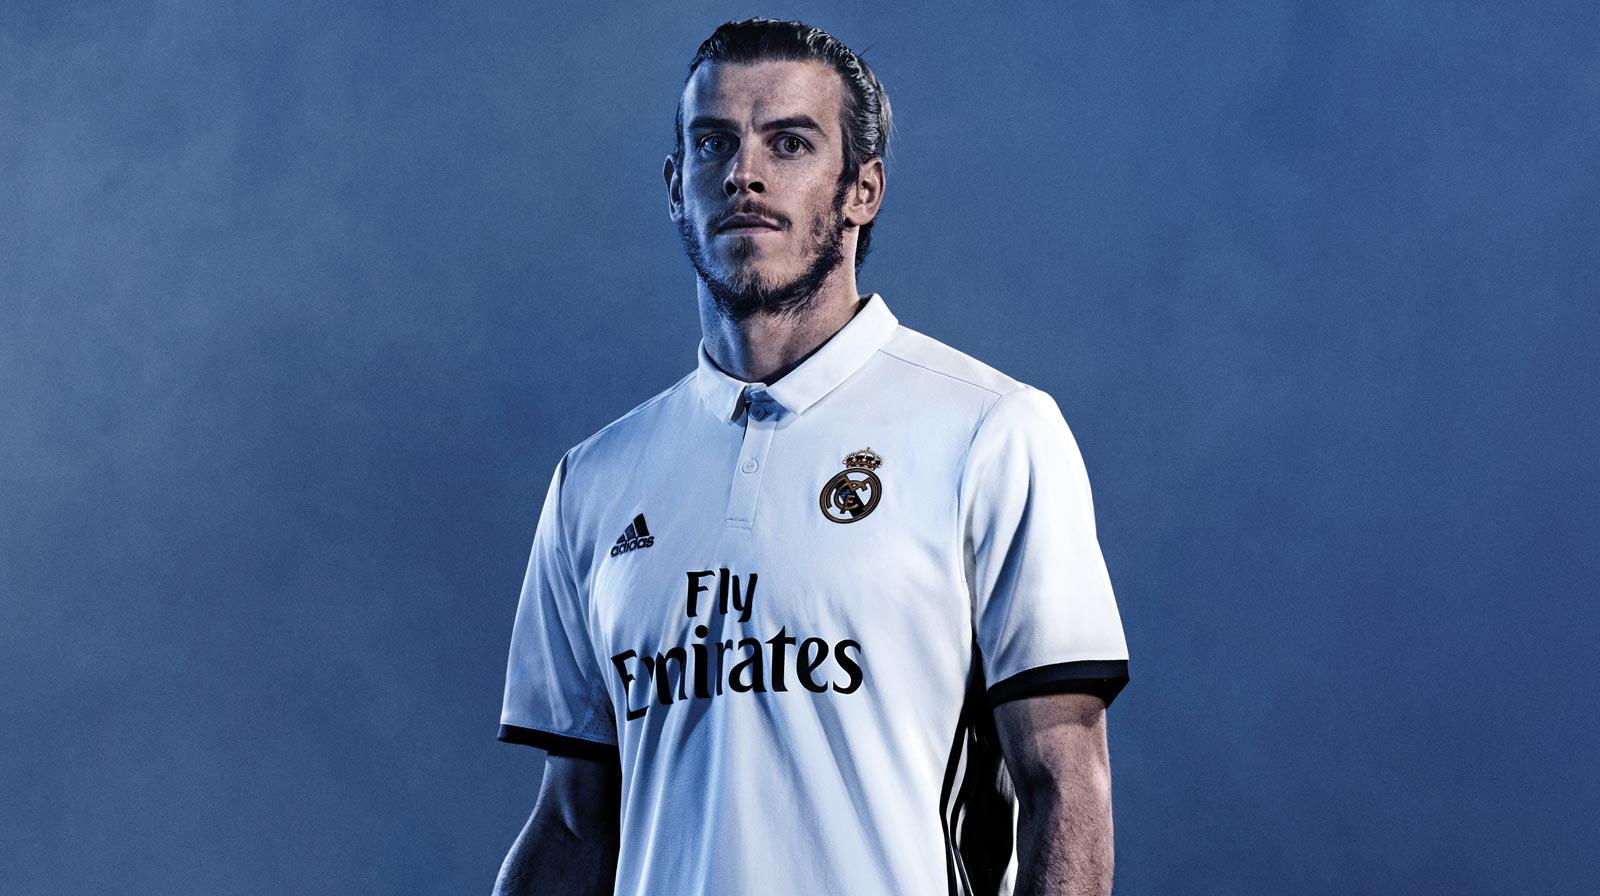 Real Madrid 16 17 Home Kit Released